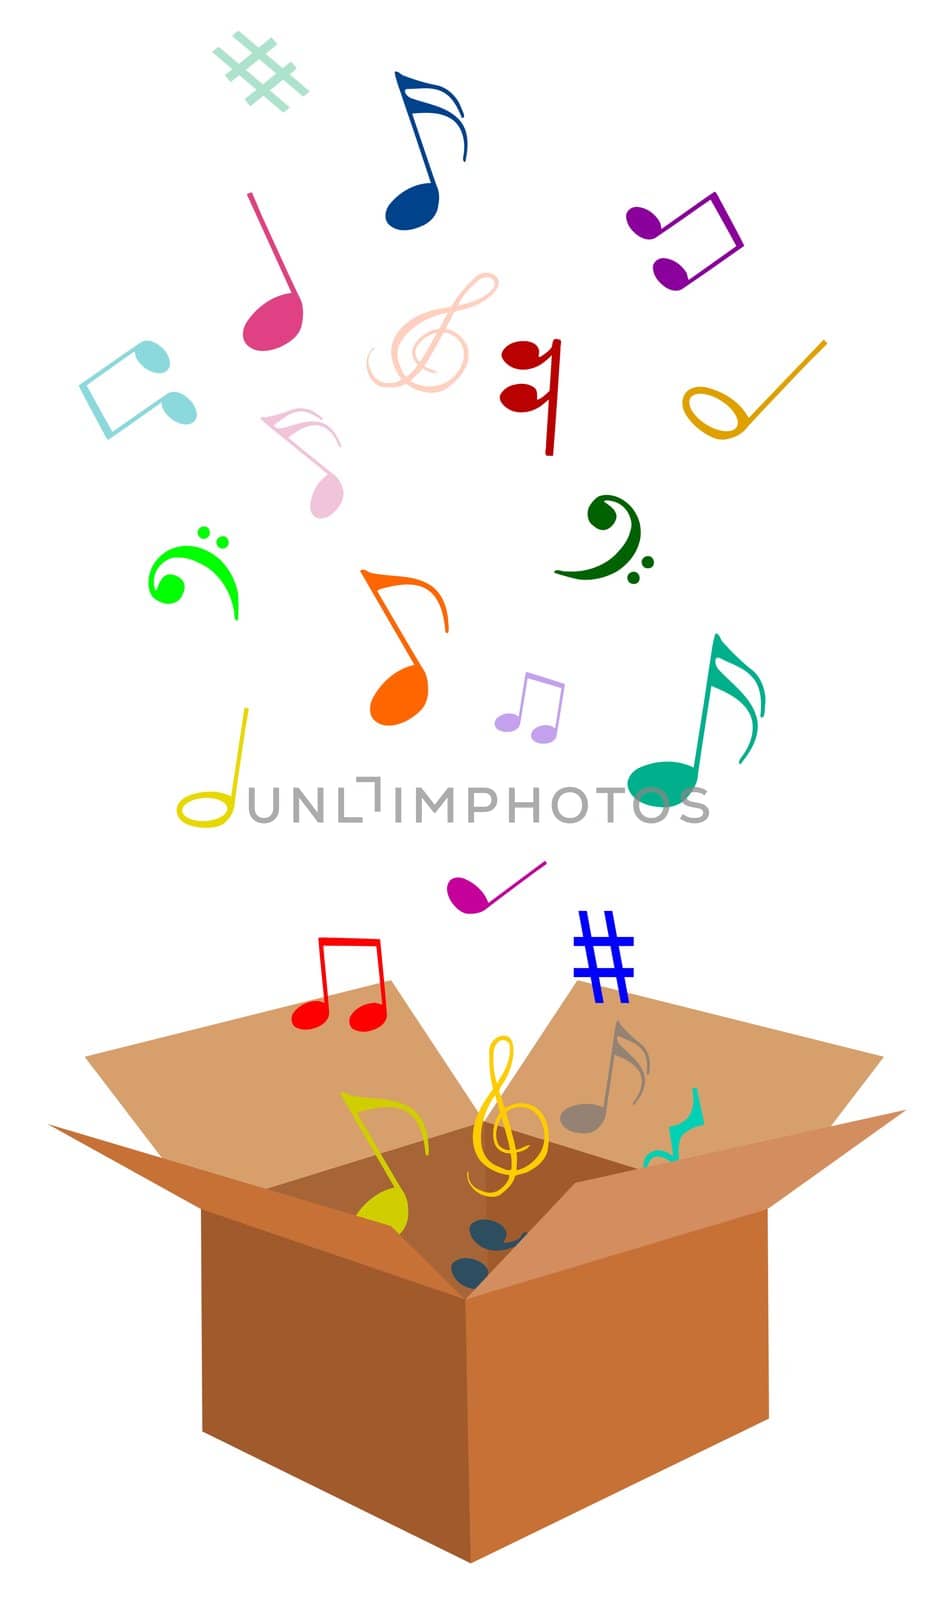 Illustration of musical notes coming out of a box